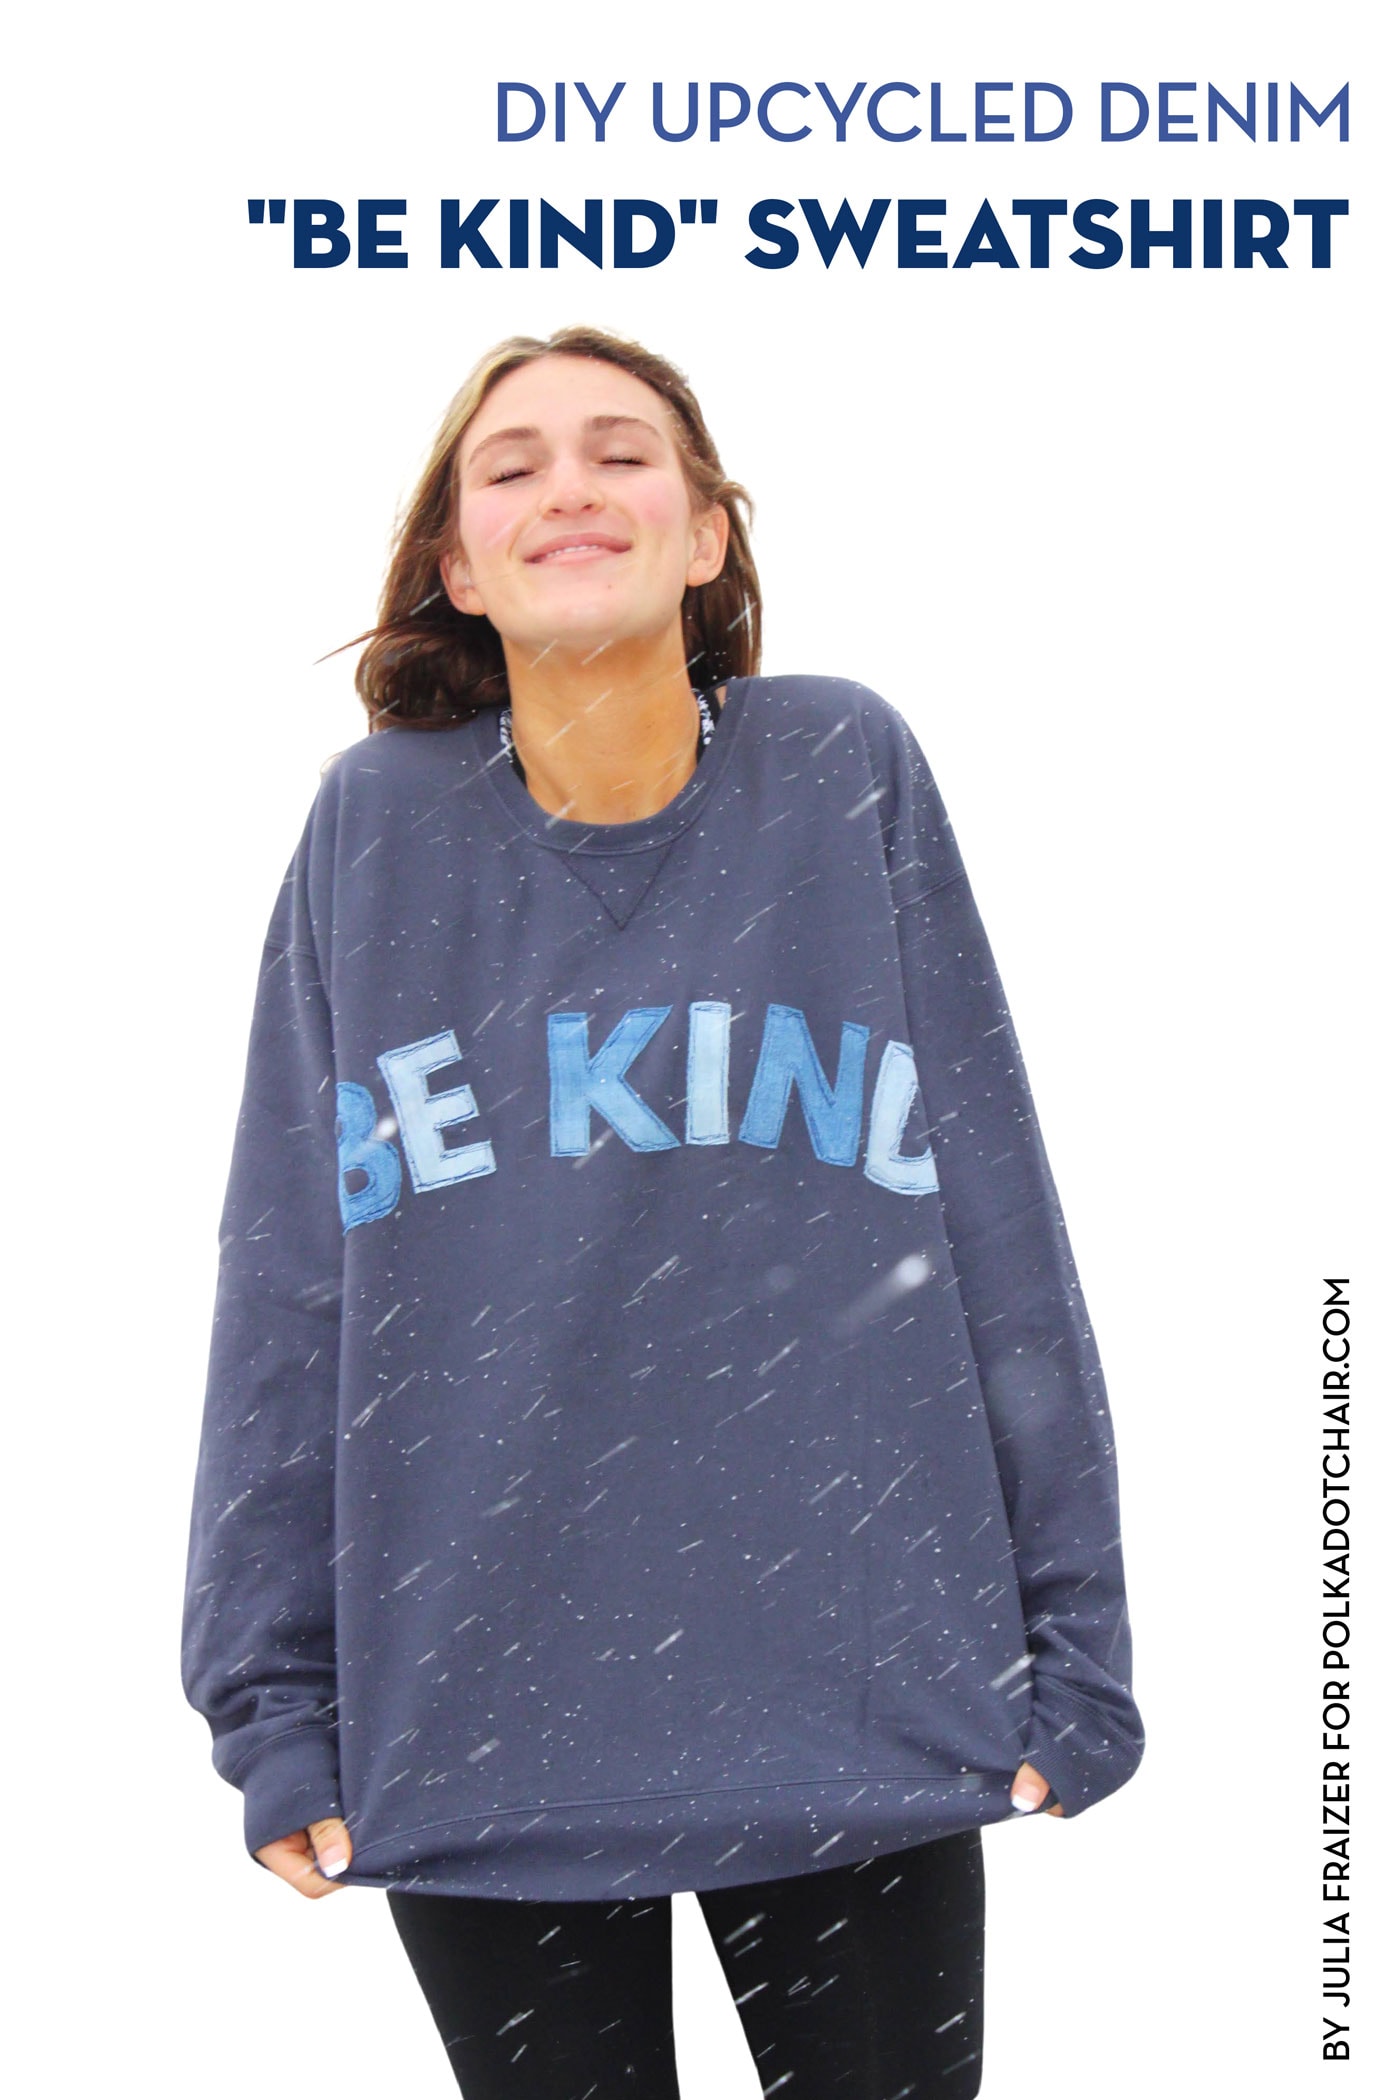 How to Repurpose Jeans into a Scrappy “Be Kind” Sweatshirt!